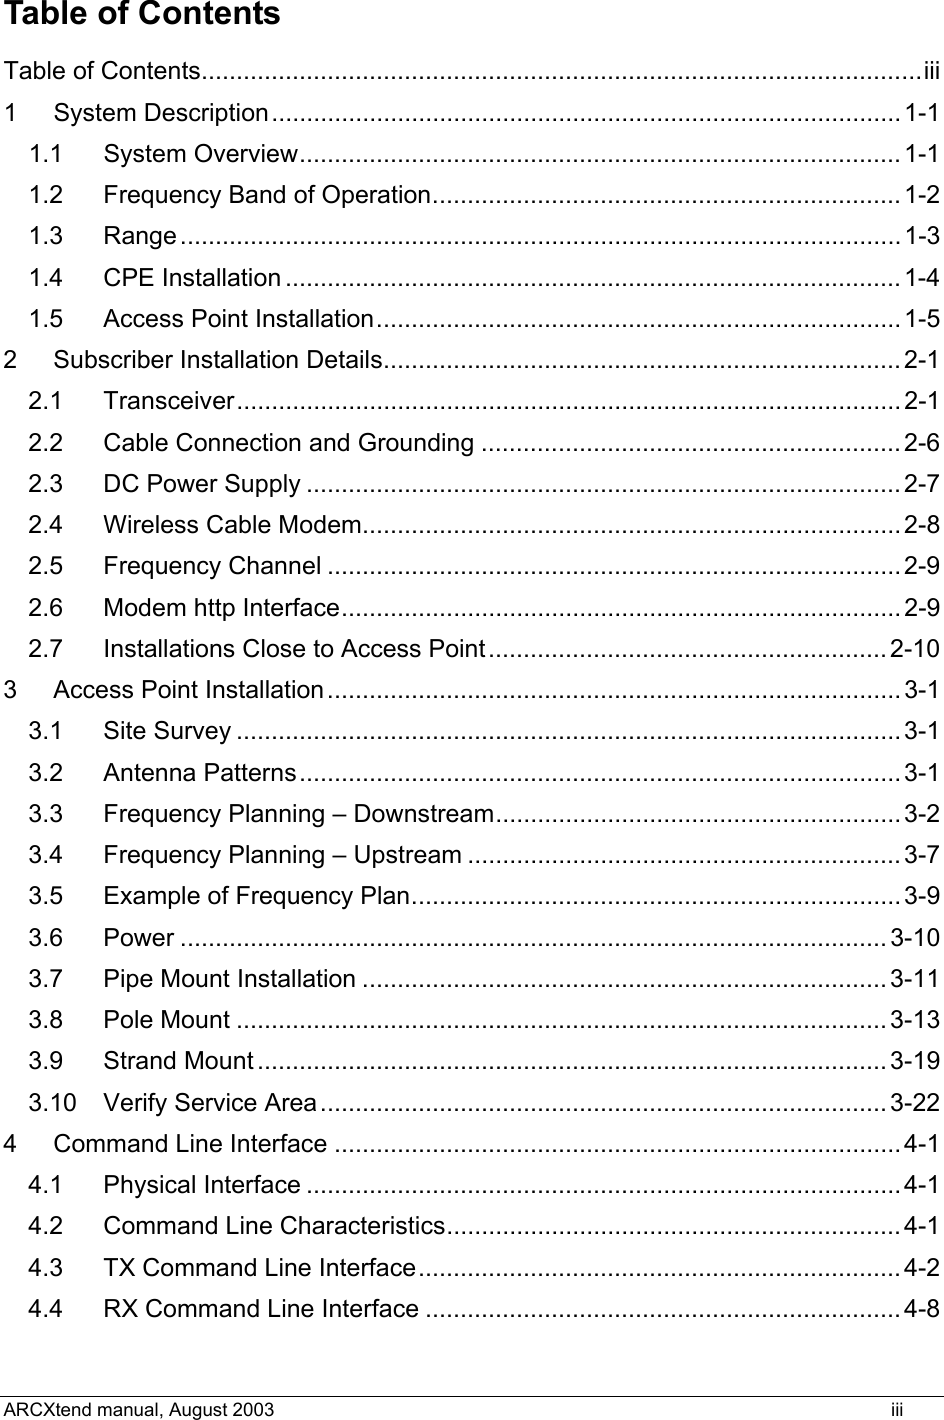  Table of Contents Table of Contents.......................................................................................................iii 1 System Description..........................................................................................1-1 1.1 System Overview...................................................................................... 1-1 1.2 Frequency Band of Operation...................................................................1-2 1.3 Range.......................................................................................................1-3 1.4 CPE Installation ........................................................................................1-4 1.5 Access Point Installation...........................................................................1-5 2 Subscriber Installation Details.......................................................................... 2-1 2.1 Transceiver............................................................................................... 2-1 2.2 Cable Connection and Grounding ............................................................2-6 2.3 DC Power Supply .....................................................................................2-7 2.4 Wireless Cable Modem.............................................................................2-8 2.5 Frequency Channel ..................................................................................2-9 2.6 Modem http Interface................................................................................ 2-9 2.7 Installations Close to Access Point.........................................................2-10 3 Access Point Installation.................................................................................. 3-1 3.1 Site Survey ...............................................................................................3-1 3.2 Antenna Patterns......................................................................................3-1 3.3 Frequency Planning – Downstream..........................................................3-2 3.4 Frequency Planning – Upstream ..............................................................3-7 3.5 Example of Frequency Plan......................................................................3-9 3.6 Power .....................................................................................................3-10 3.7 Pipe Mount Installation ........................................................................... 3-11 3.8 Pole Mount .............................................................................................3-13 3.9 Strand Mount .......................................................................................... 3-19 3.10 Verify Service Area.................................................................................3-22 4 Command Line Interface .................................................................................4-1 4.1 Physical Interface .....................................................................................4-1 4.2 Command Line Characteristics................................................................. 4-1 4.3 TX Command Line Interface.....................................................................4-2 4.4 RX Command Line Interface ....................................................................4-8 ARCXtend manual, August 2003    iii 